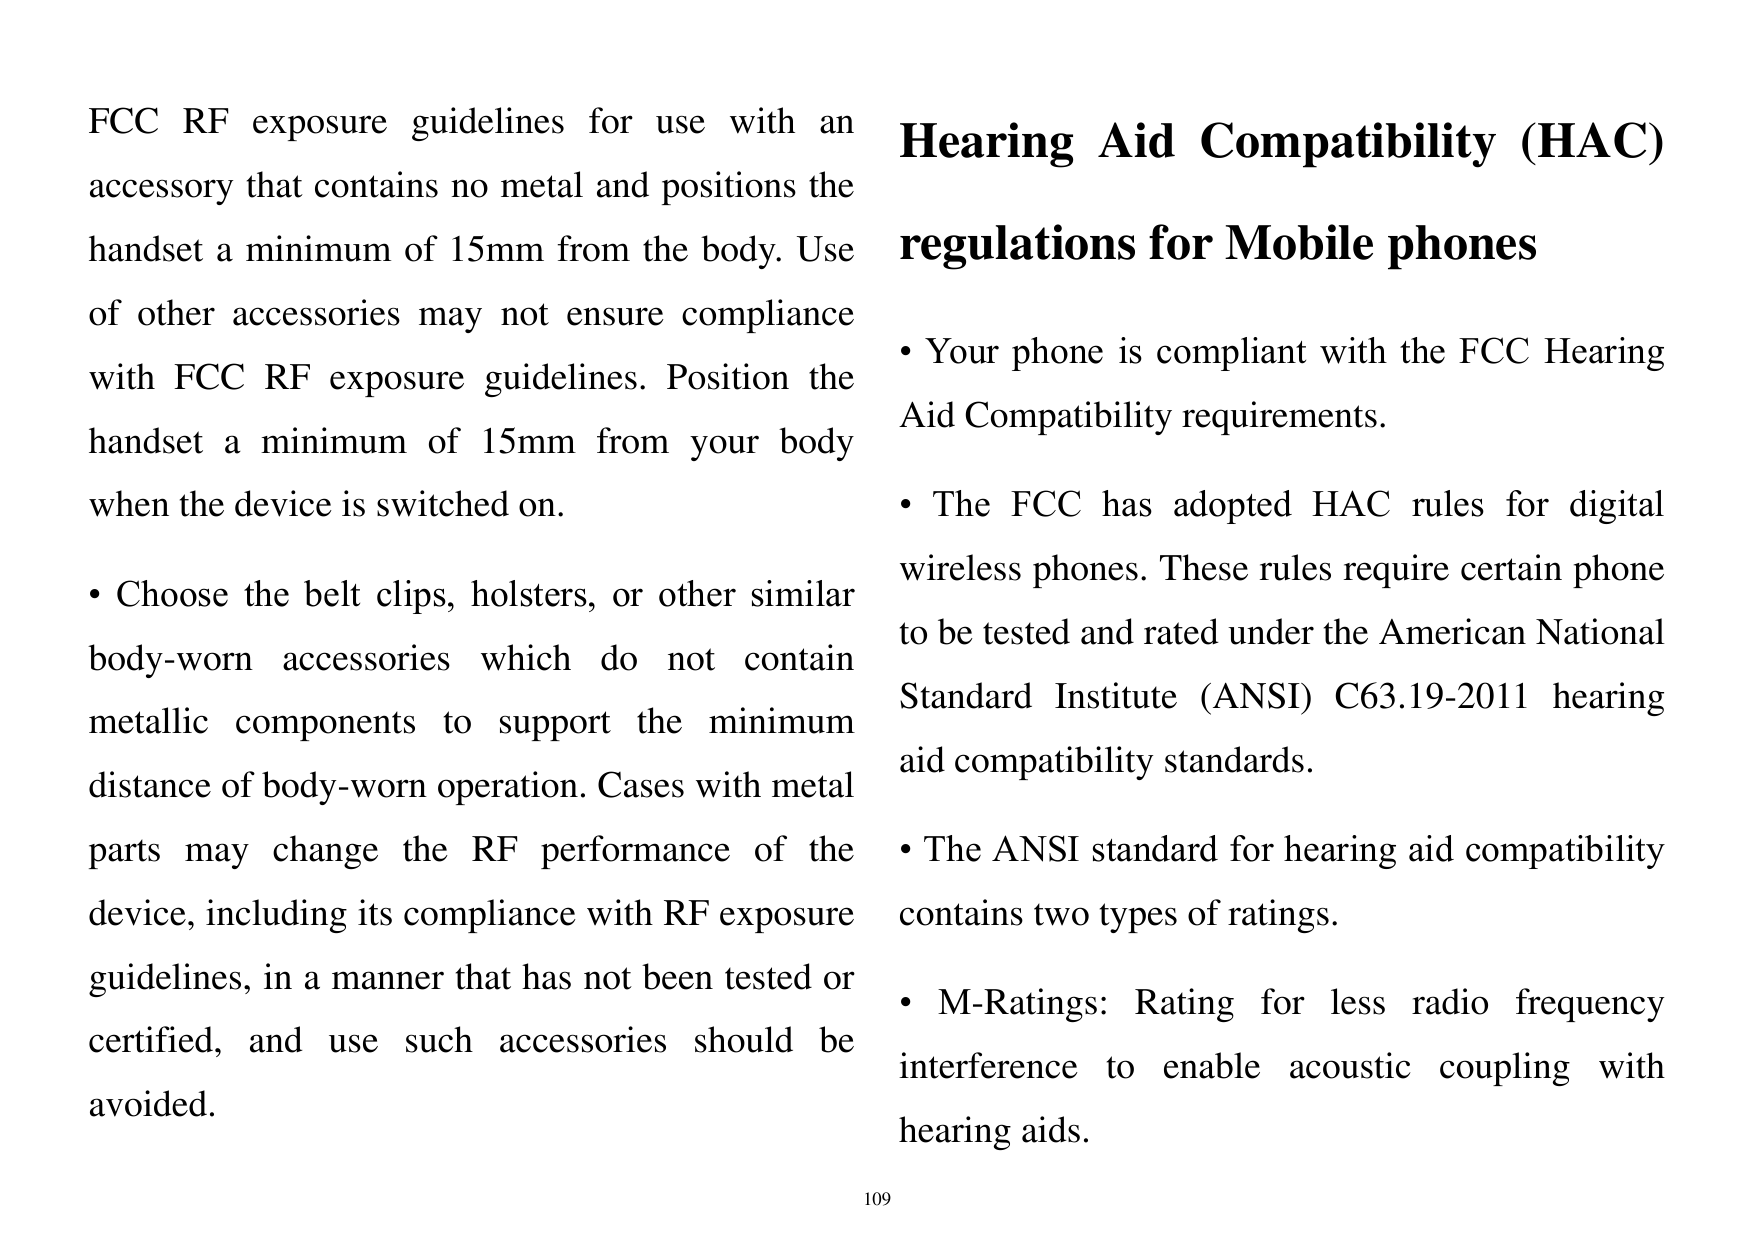 FCC RF exposure guidelines for use with anHearing Aid Compatibility (HAC)accessory that contains no metal and positions theregul